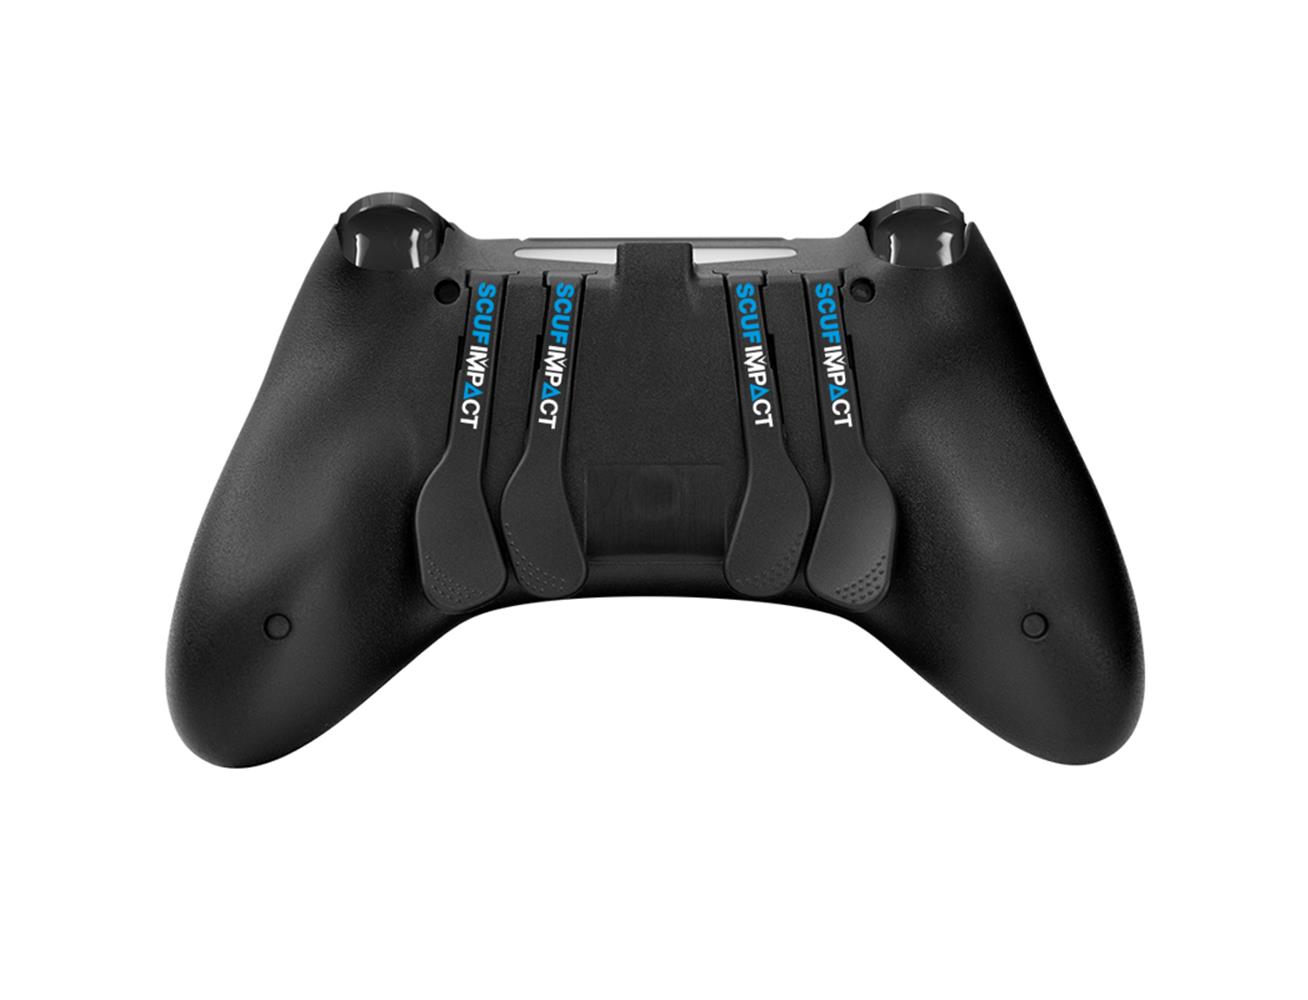 SCUF Impact Custom Controller For PS4 - Black| Blink Kuwait